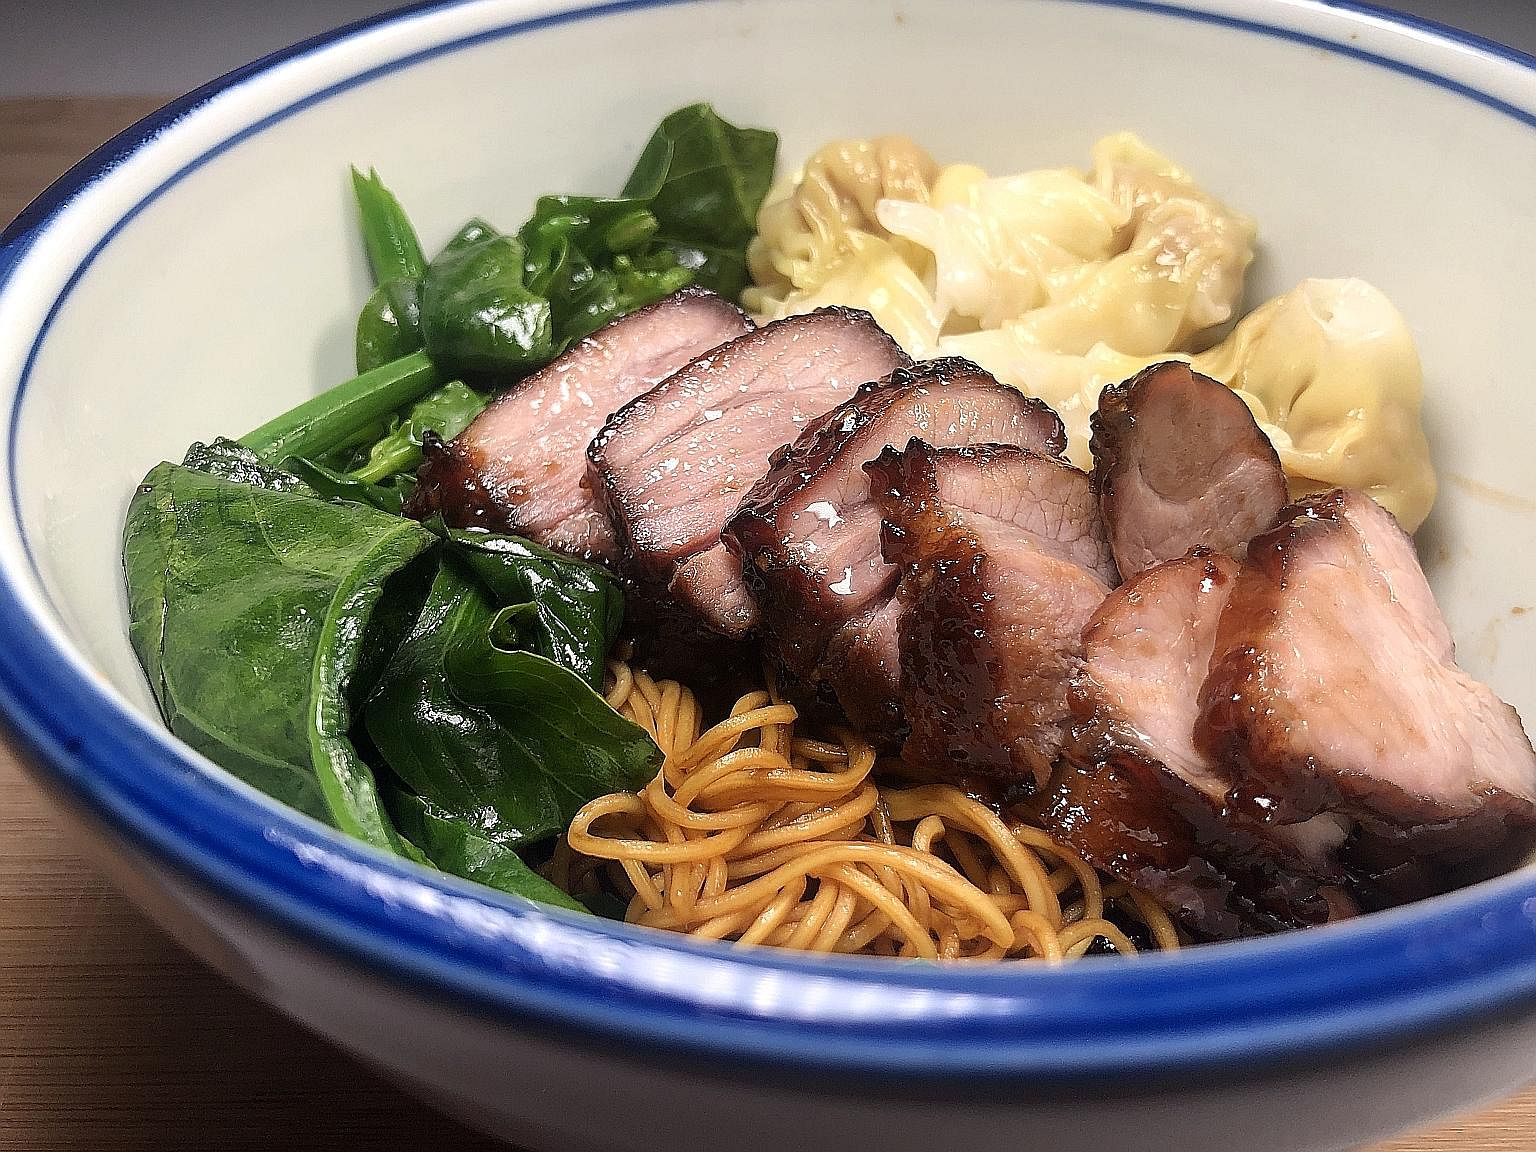 The wonton and char siew used to make this dish can be stored in the freezer for up to a month. 